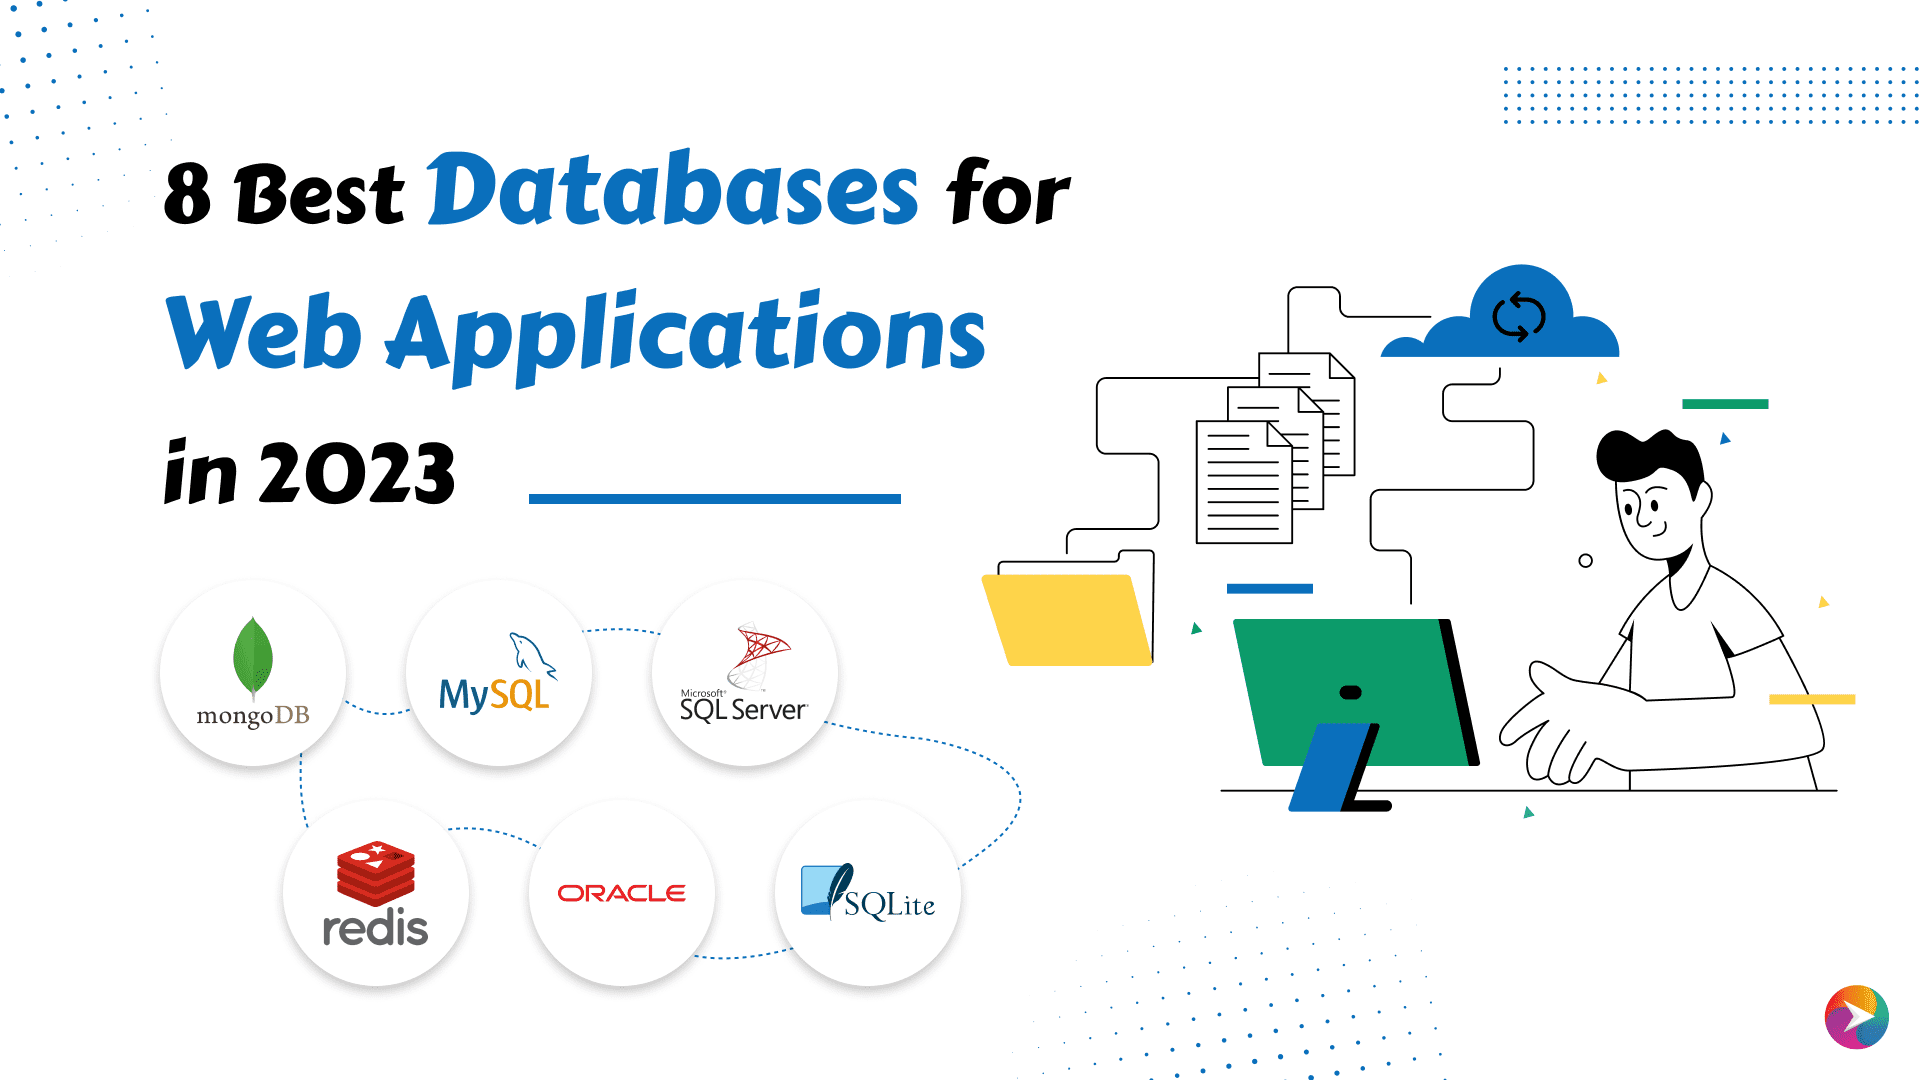 8 best databases for web applications in 2023